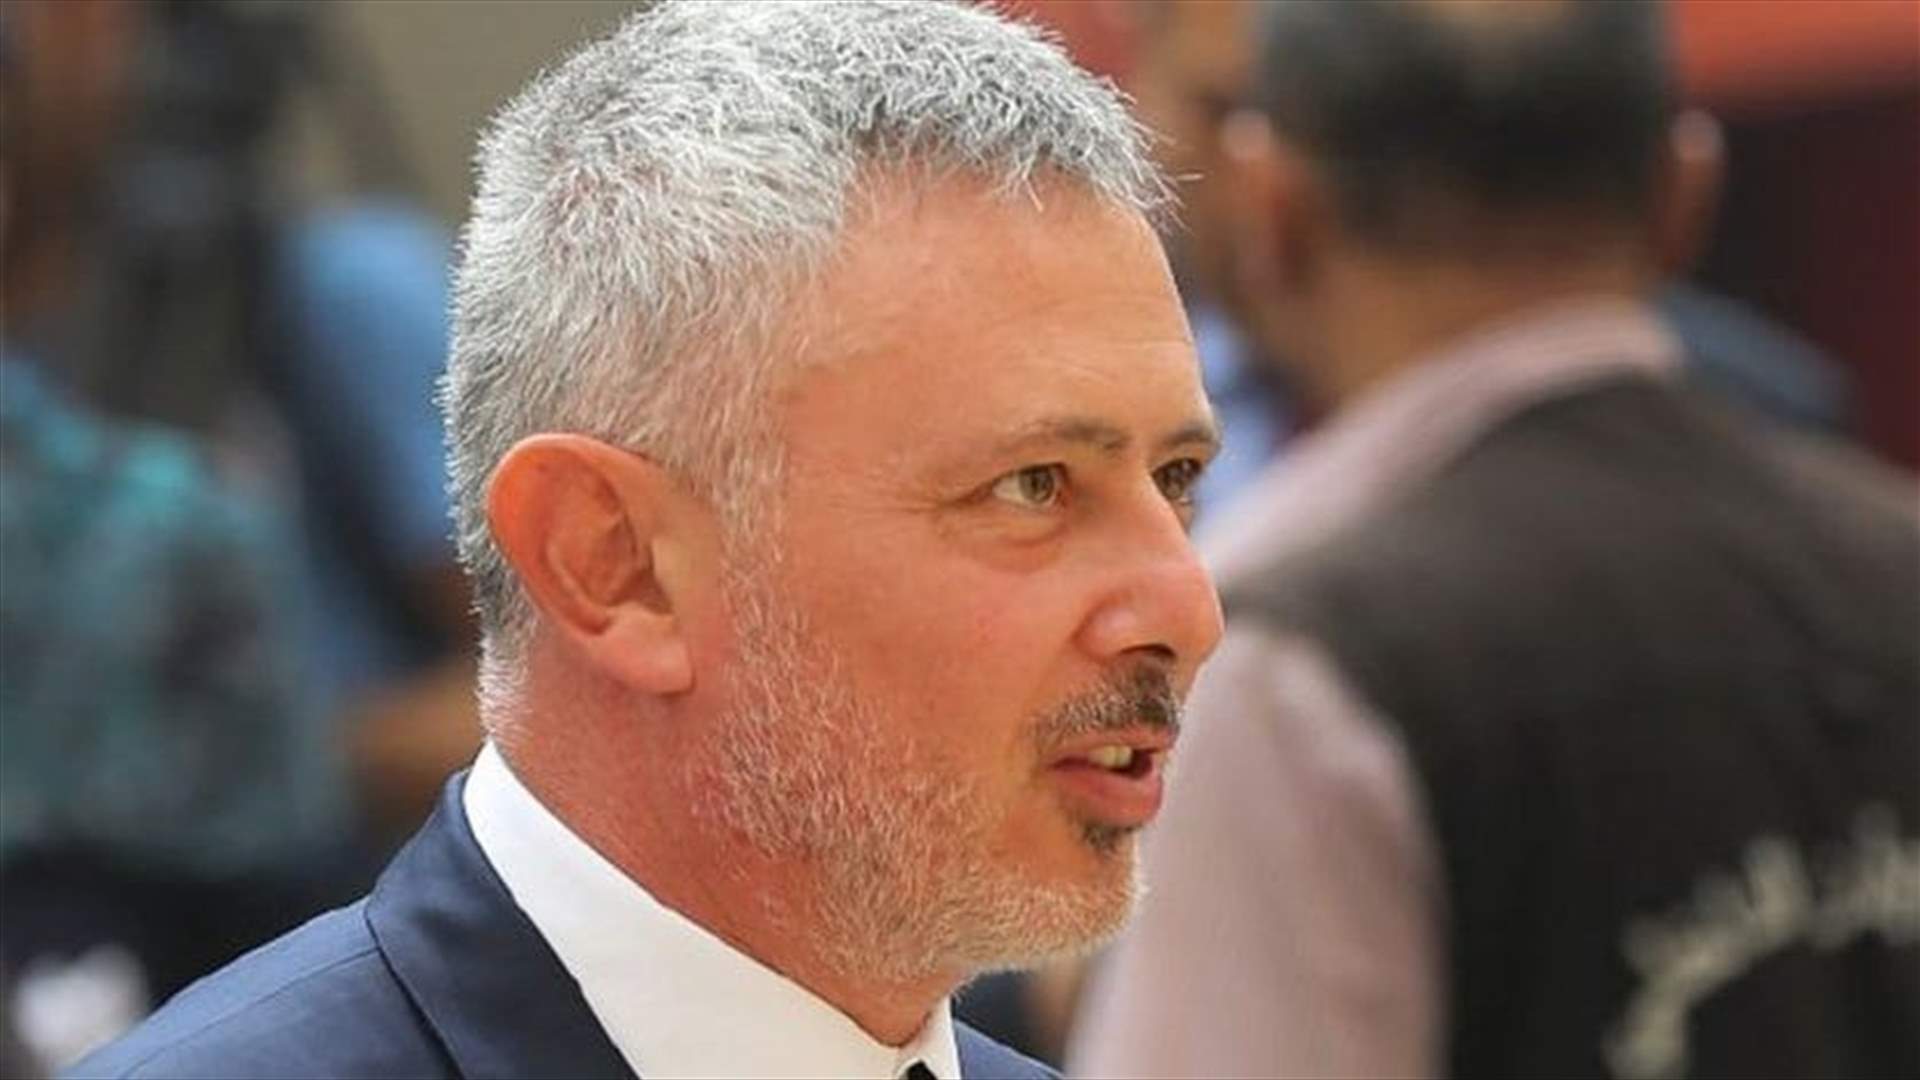 LF would not obstruct quorum of a &quot;Frangieh election session&quot;: Sources